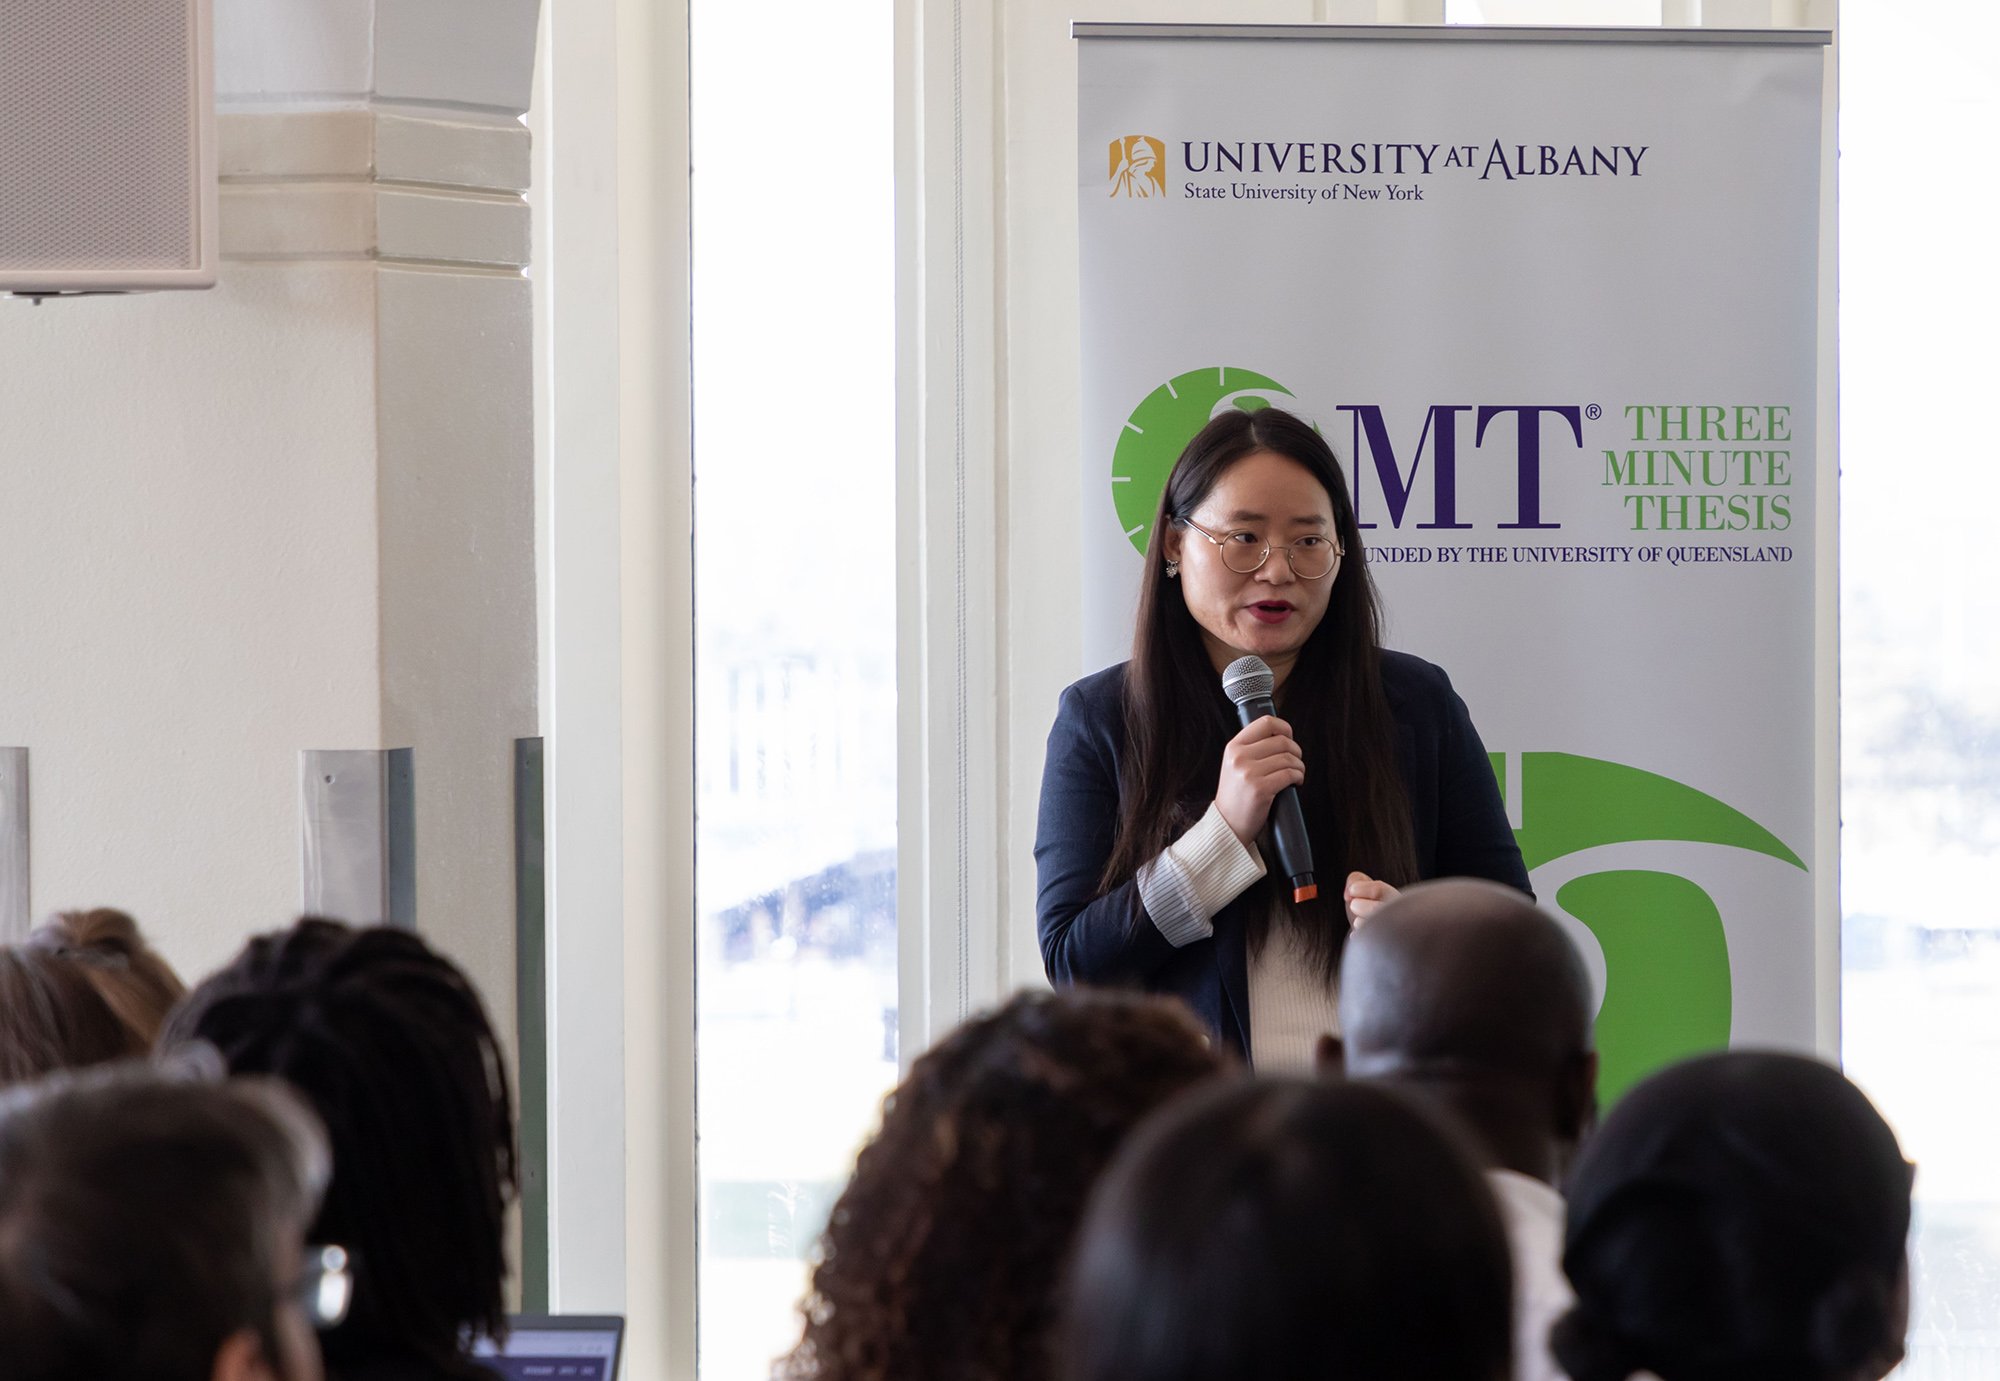 Jina Byeon, a doctoral student in curriculum and instruction, presents her findings at the 3-Minute Thesis competition.